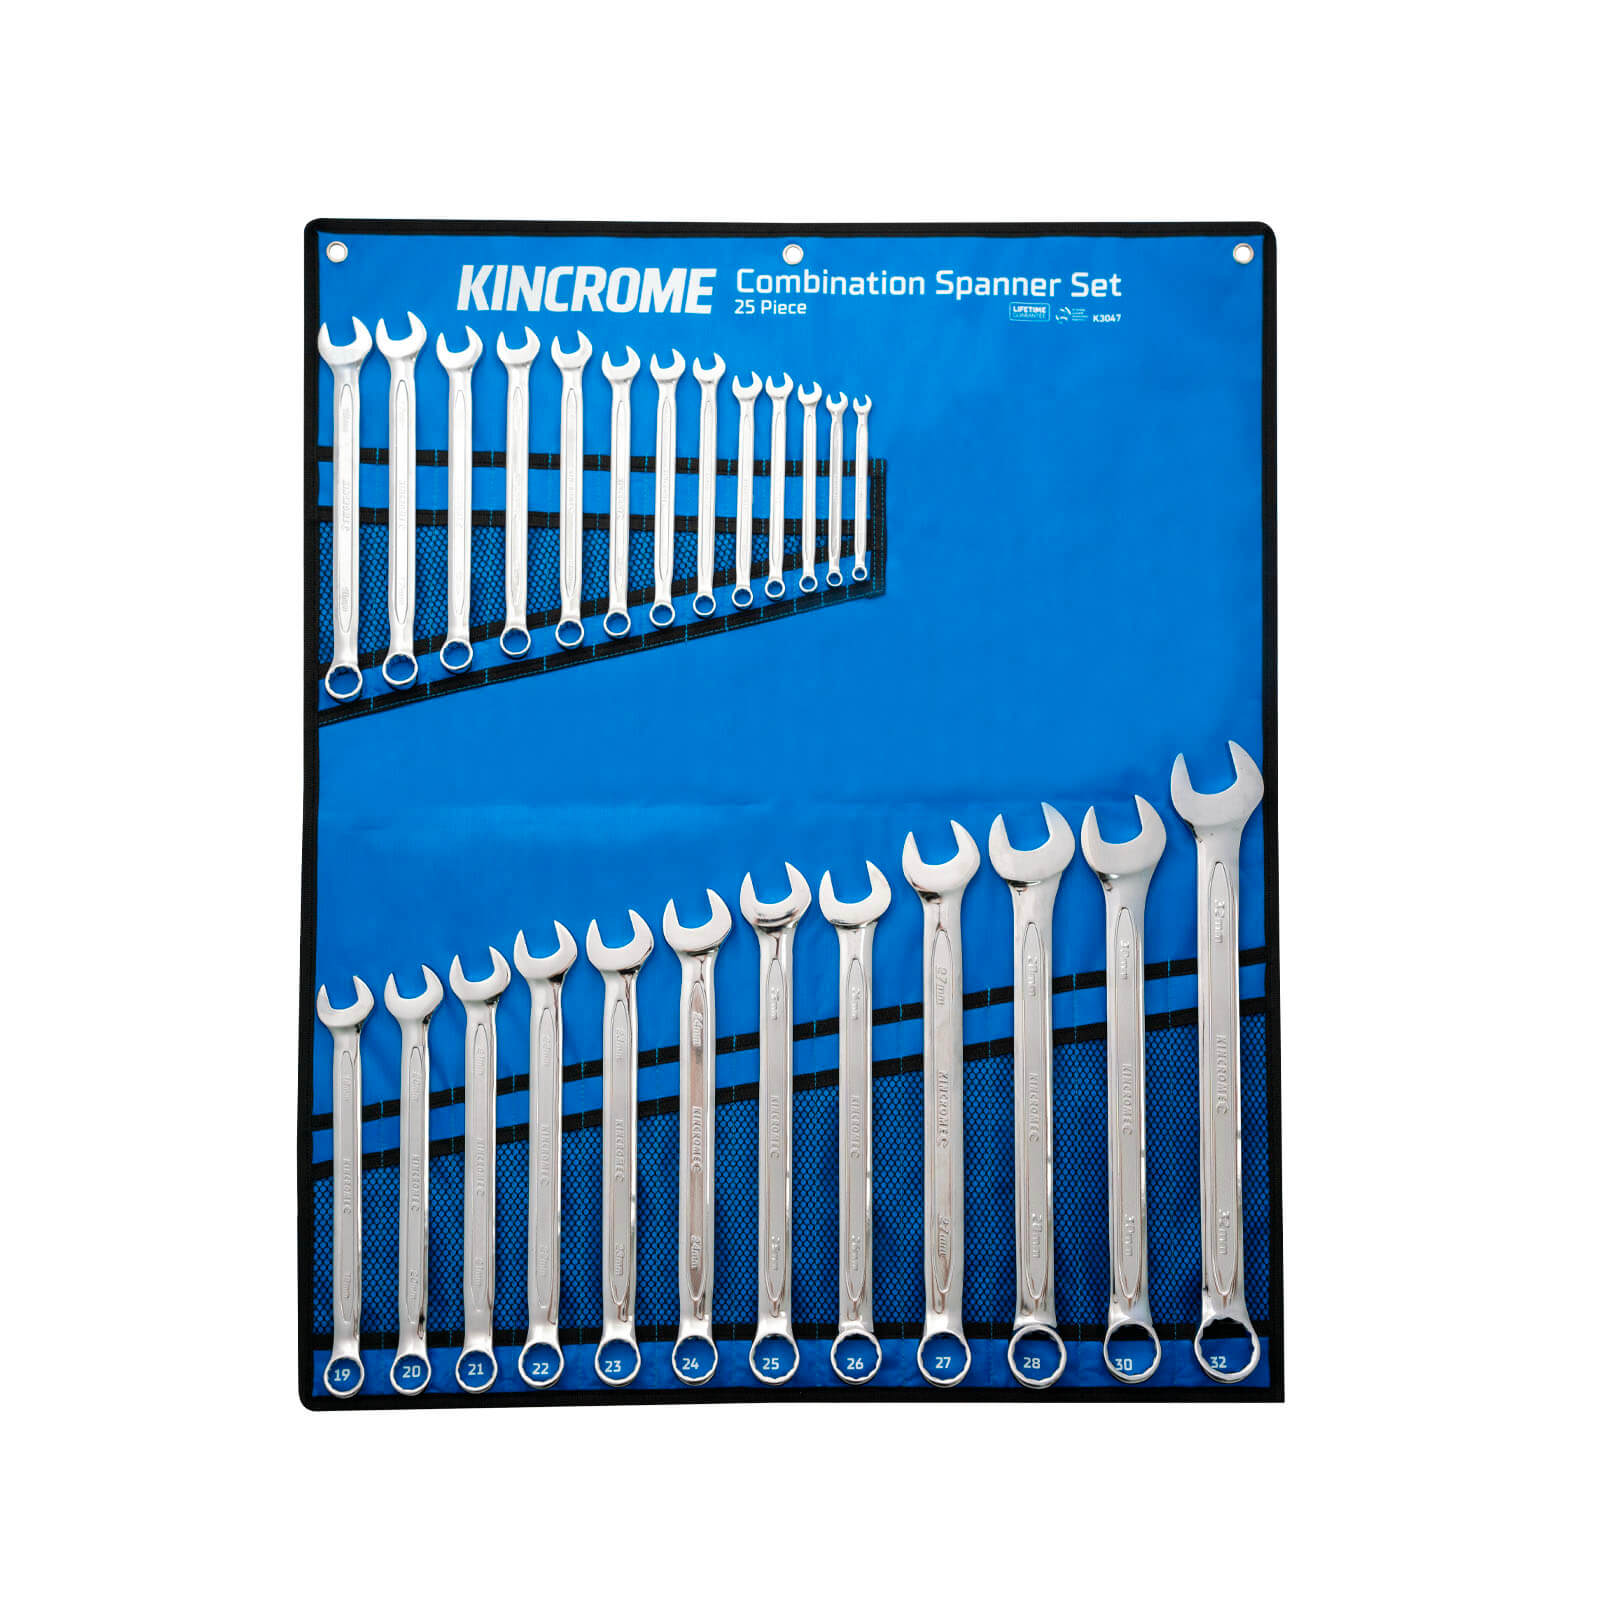 Combination Spanner Set 25 Piece, Metric - K3047 by Kincrome